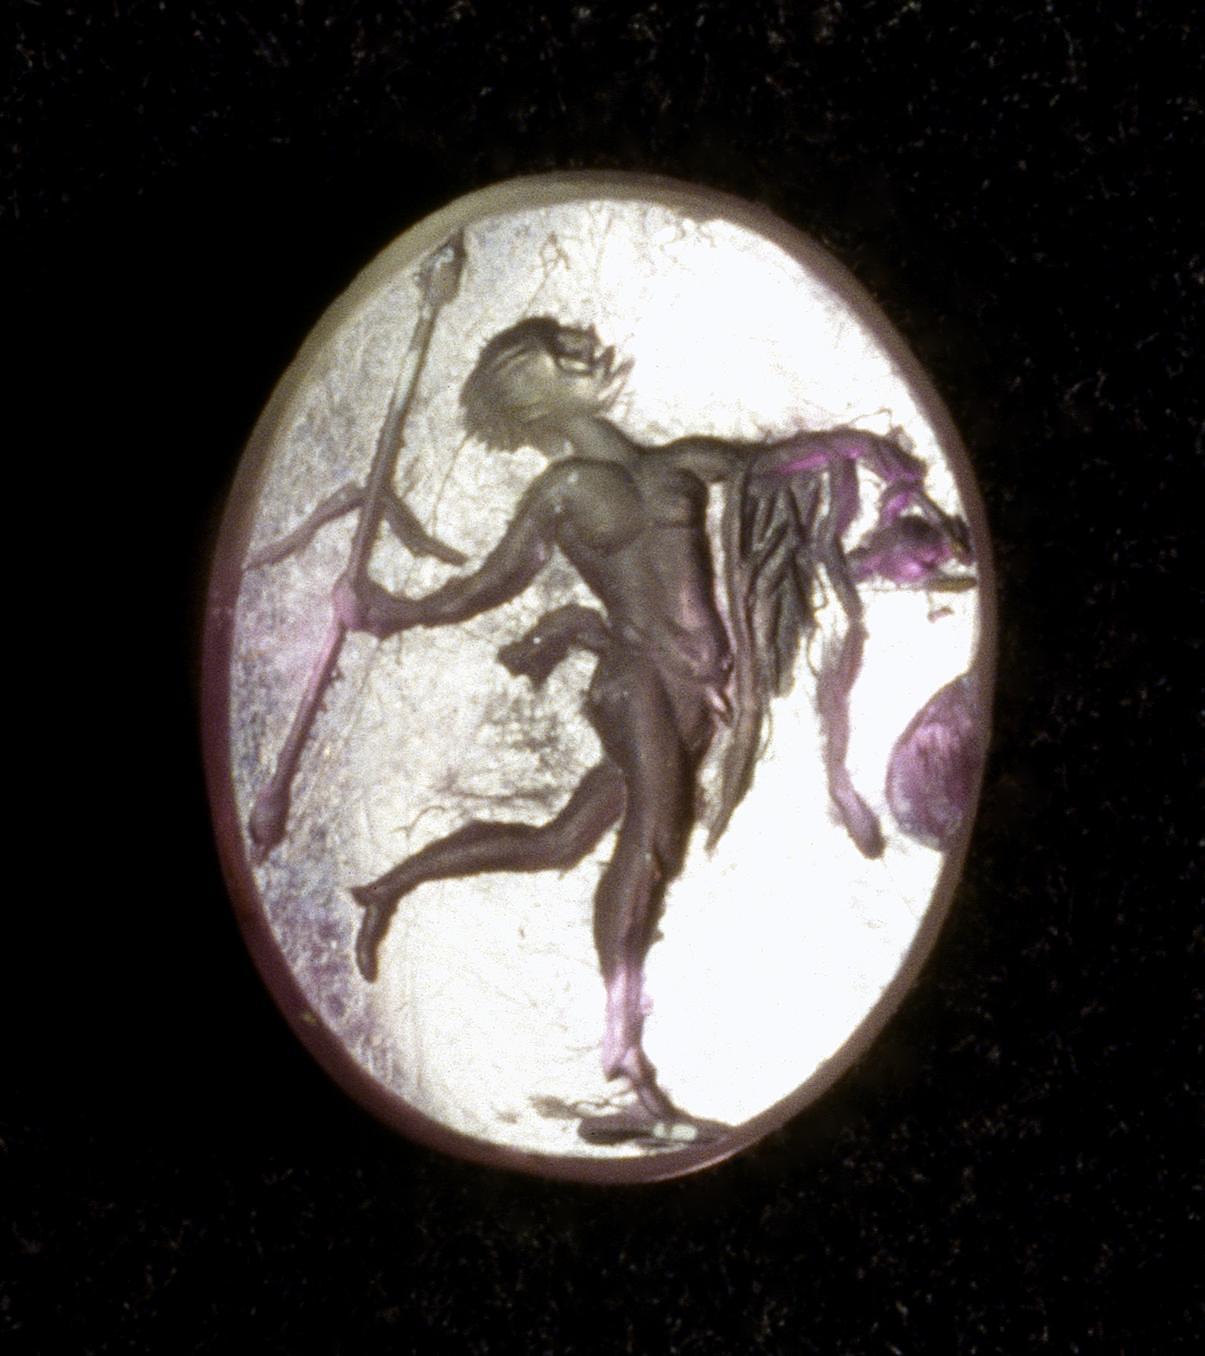 Satyr with a drinking cup and a thyrsus staff, I384